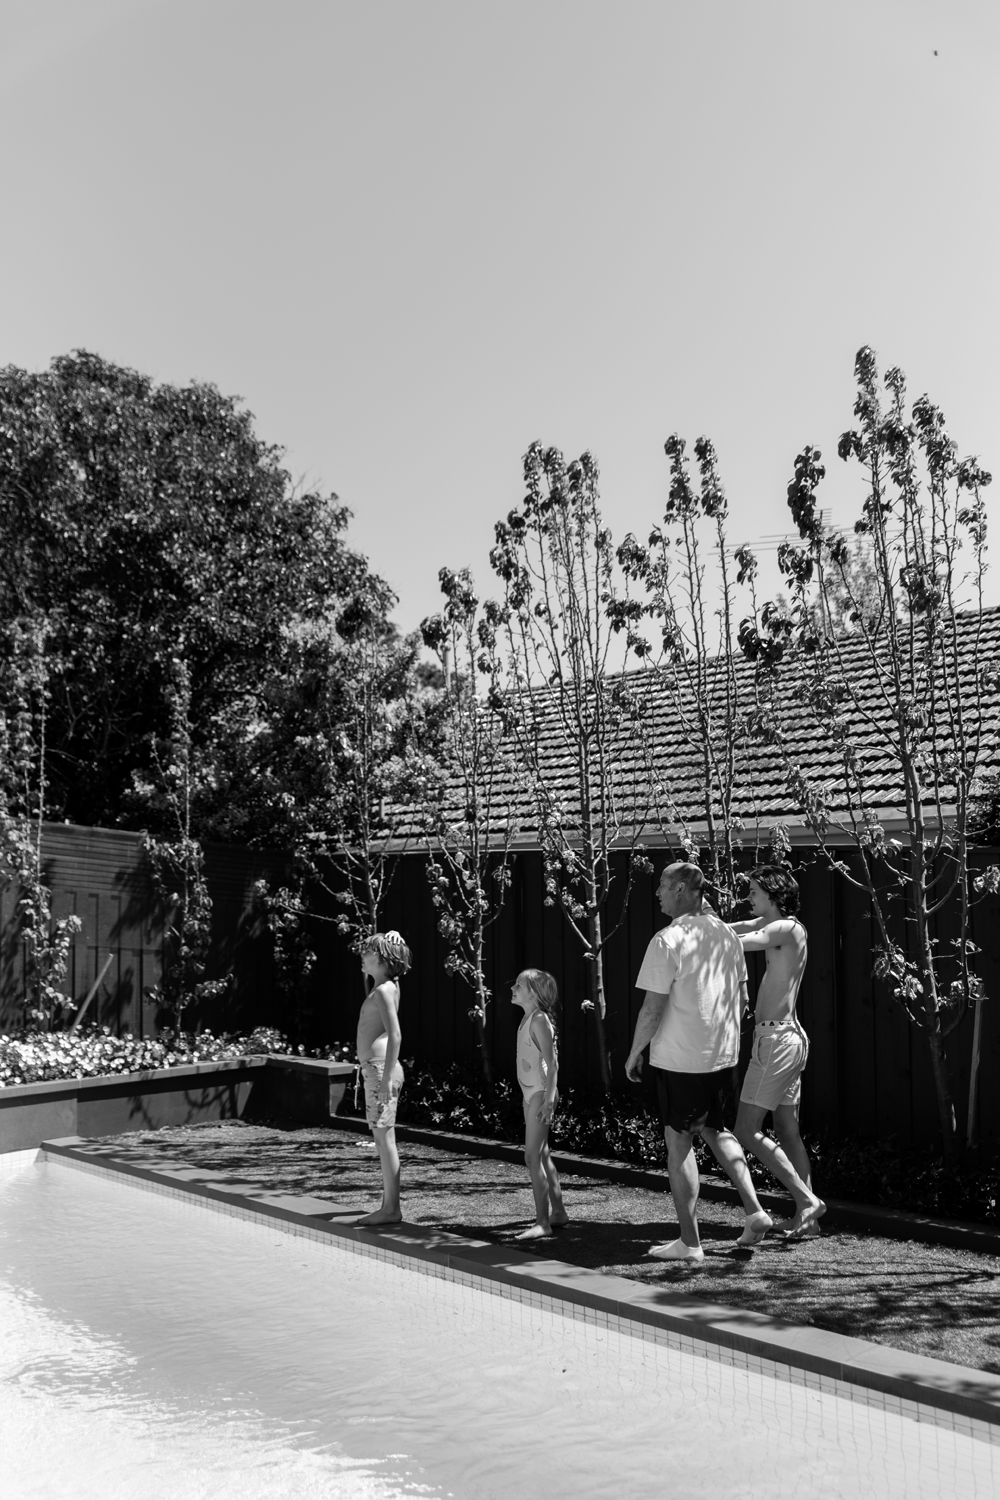 Black and white photograph of family standing poolside in the backyard of a domestic environment.